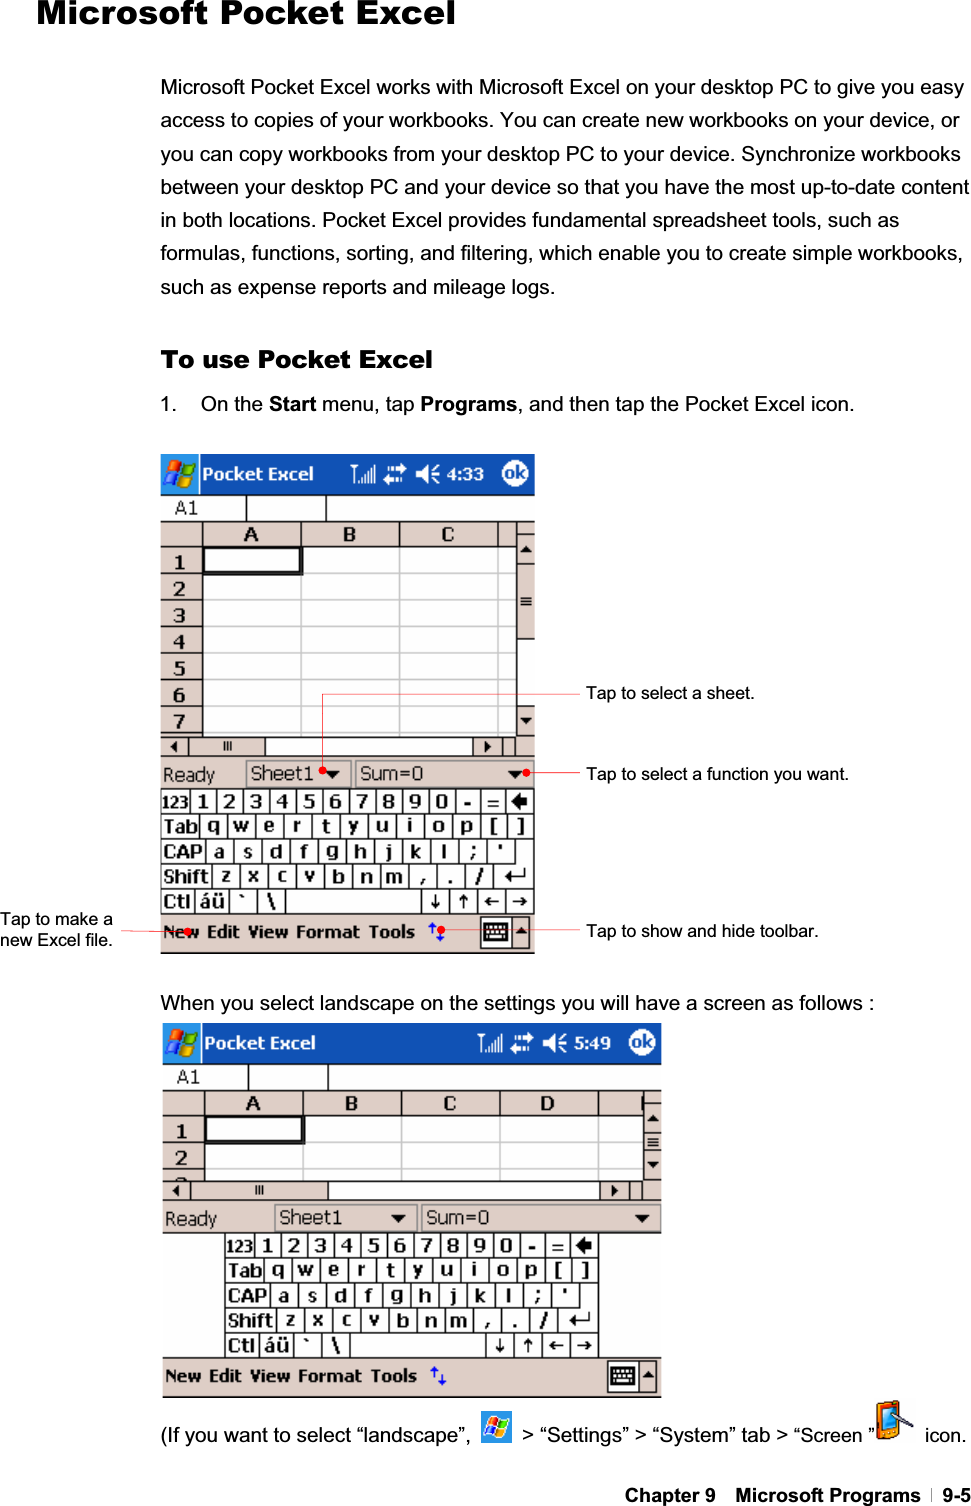 GChapter 9  Microsoft Programs  9-5Microsoft Pocket Excel Microsoft Pocket Excel works with Microsoft Excel on your desktop PC to give you easy access to copies of your workbooks. You can create new workbooks on your device, or you can copy workbooks from your desktop PC to your device. Synchronize workbooks between your desktop PC and your device so that you have the most up-to-date content in both locations. Pocket Excel provides fundamental spreadsheet tools, such as formulas, functions, sorting, and filtering, which enable you to create simple workbooks, such as expense reports and mileage logs. To use Pocket Excel 1. On the Start menu, tap Programs, and then tap the Pocket Excel icon. When you select landscape on the settings you will have a screen as follows :   (If you want to select “landscape”,    &gt; “Settings” &gt; “System” tab &gt; “Screen ”  icon. Tap to select a function you want. Tap to select a sheet. Tap to show and hide toolbar. Tap to make a new Excel file. 